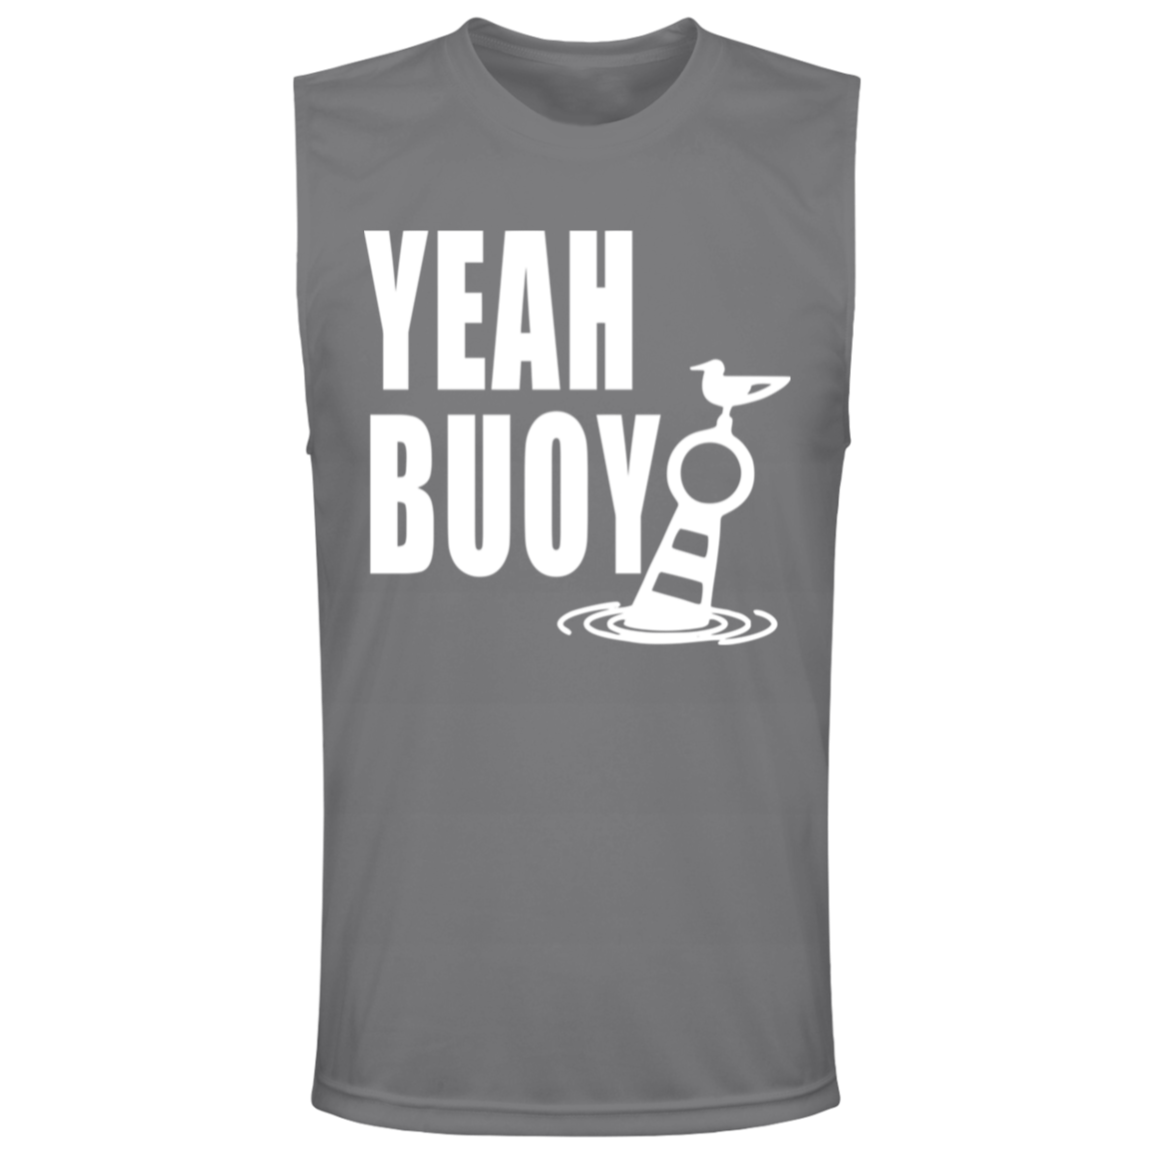 ***2 SIDED***  HRCL FL - Yeah Buoy - - 2 Sided - UV 40+ Protection TT11M Team 365 Mens Zone Muscle Tee